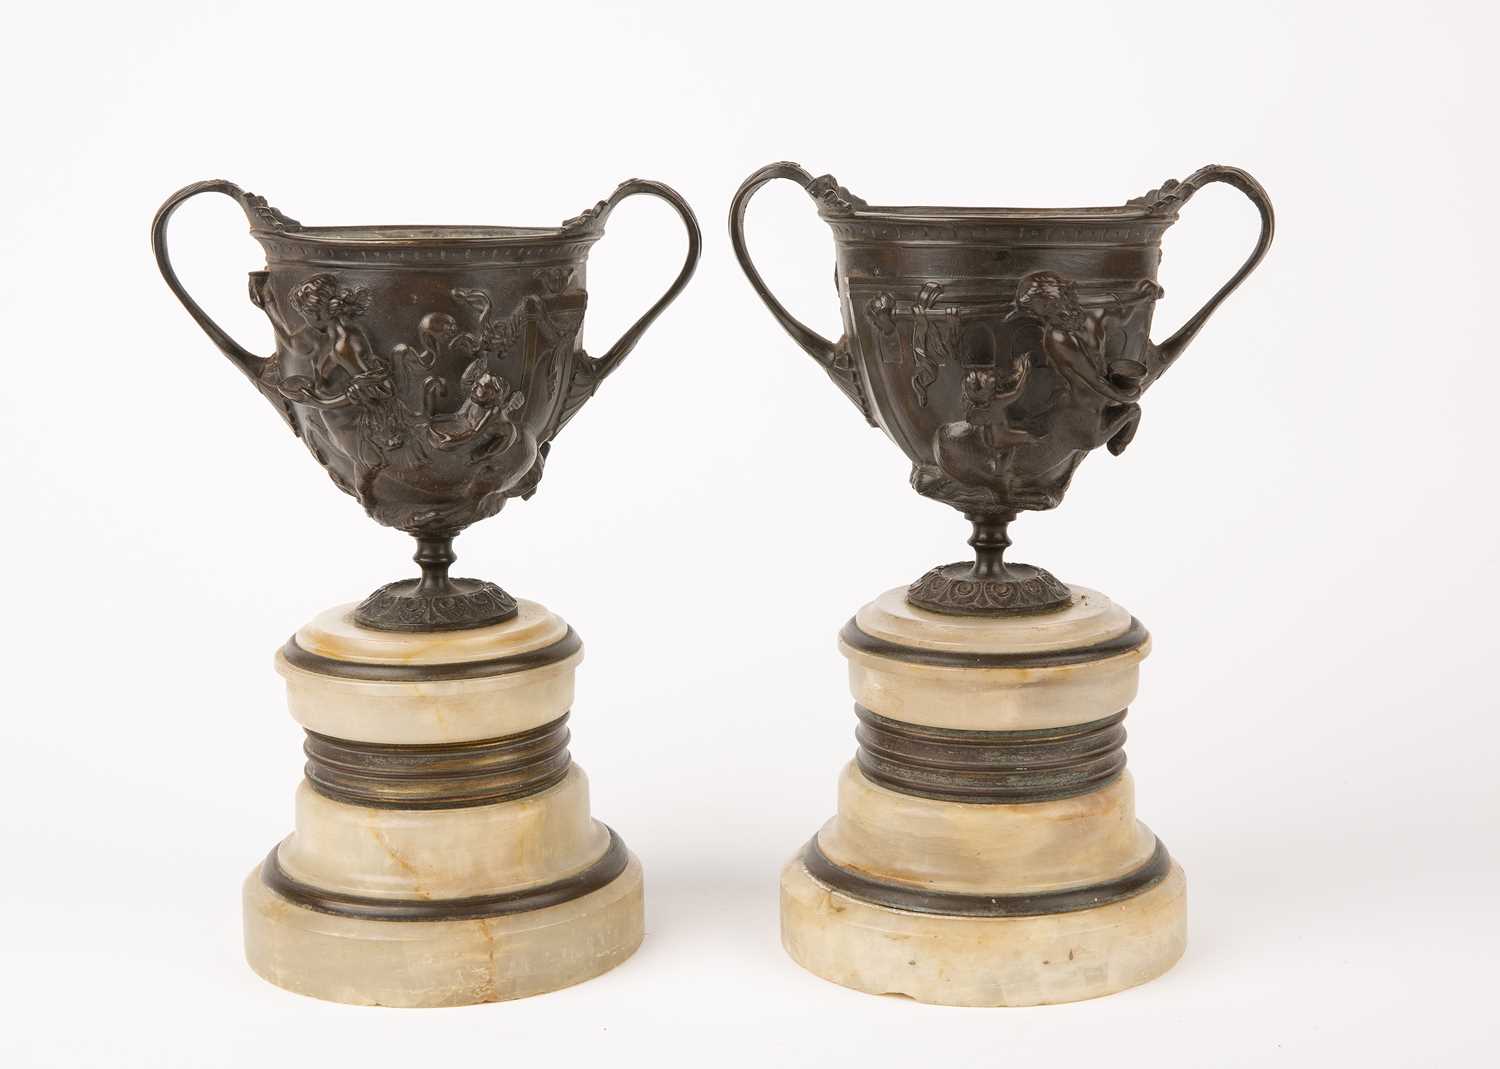 A pair of 19th century Grand Tour bronze urns with Centaurs in relief and mounted on alabaster socle - Image 2 of 2